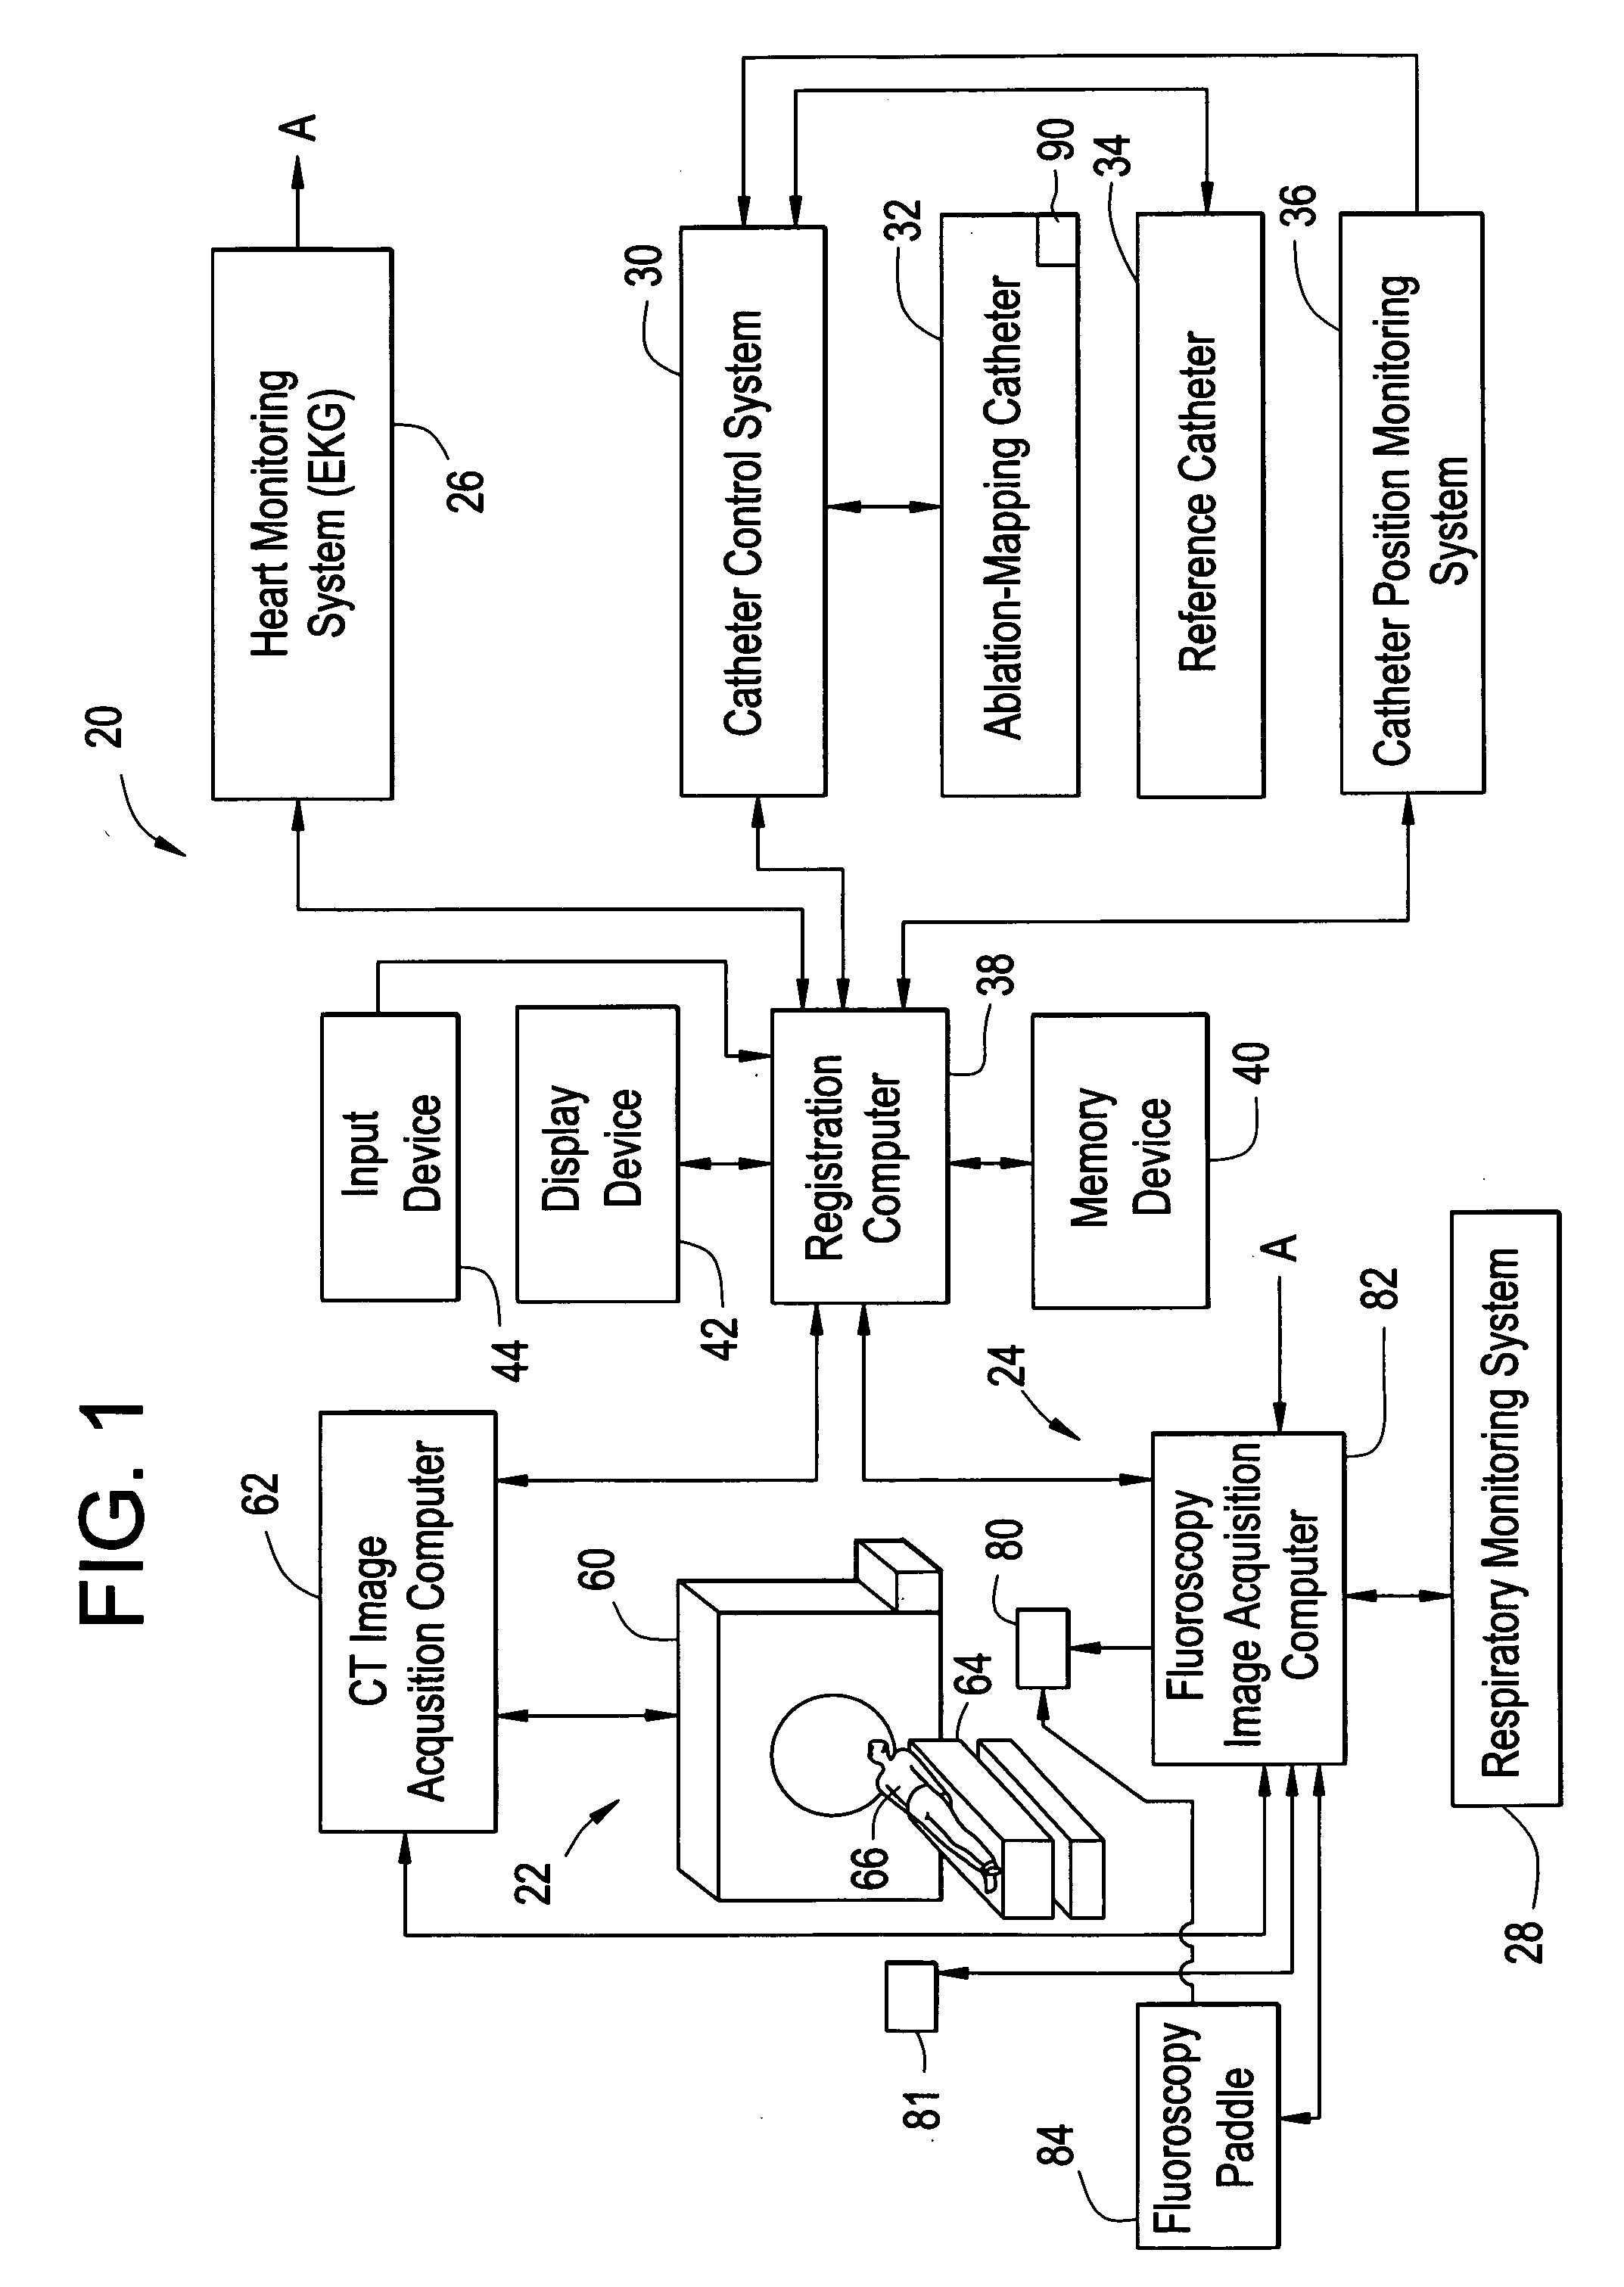 Methods for displaying a location of a point of interest on a 3-d model of an anatomical region